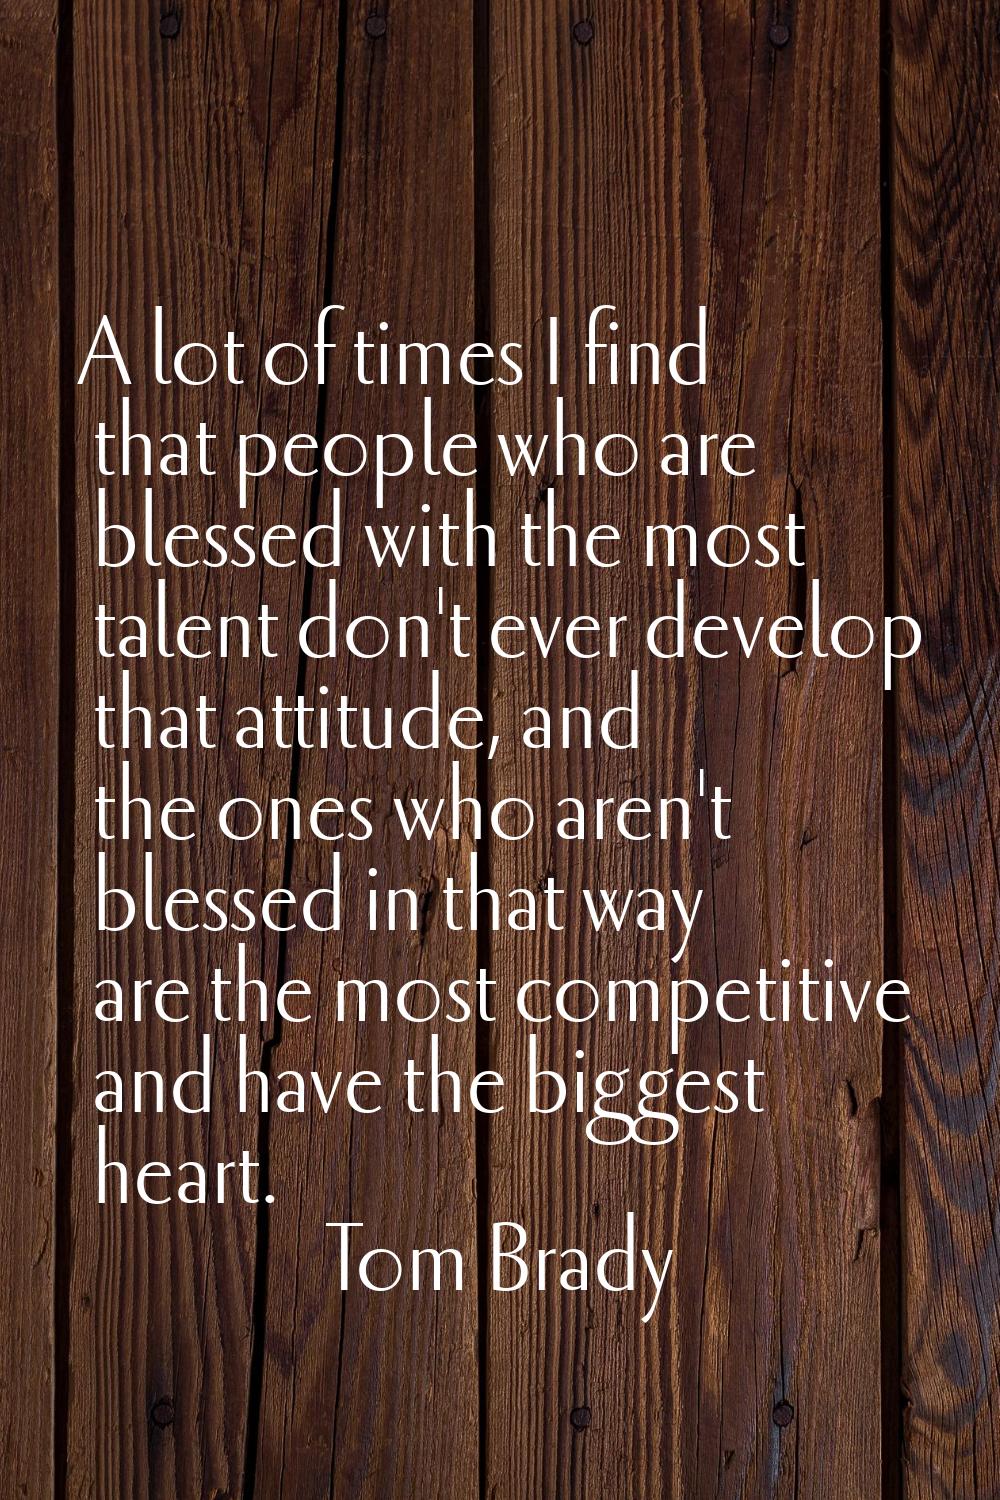 A lot of times I find that people who are blessed with the most talent don't ever develop that atti